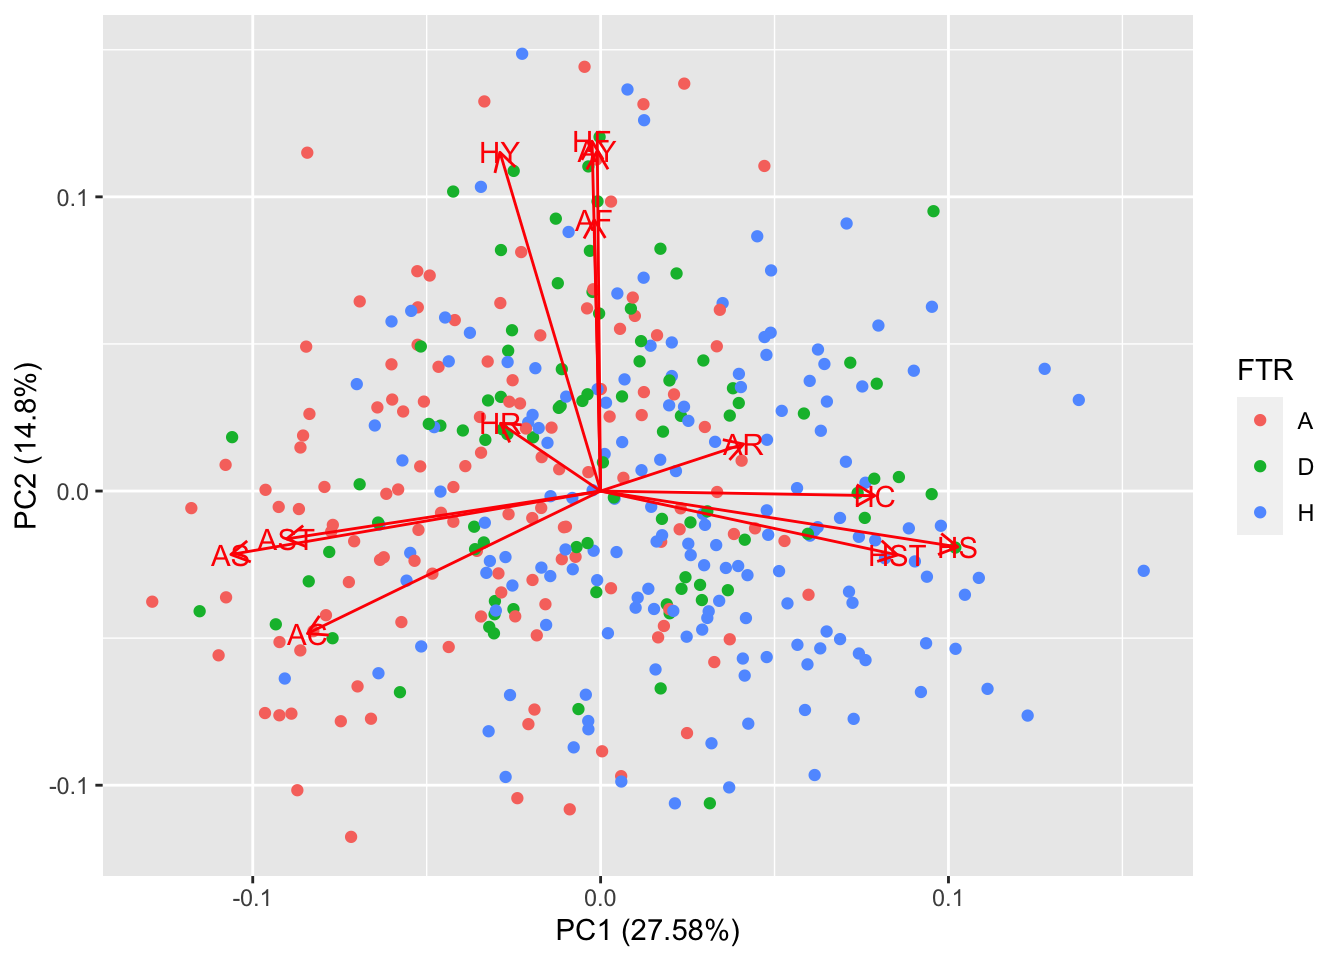 A scatter plot with the first principal component on the x-axis and the second principal component on the y-axis.  Points are colored based on whether the home team won, the away team won, or the match ended in a draw.  There are additional arrows superimposed on the points describing the principal component loadings (direction and weight) for each of the quantitative variables used -- Number of shots taken by the home team; Number of shots taken by the away team; Number of shots on target by the home team ; Number of shots on target by the away team; Number of fouls by the home team; Number of fouls by the away team; Number of corners taken by the home team; Number of corners taken by the away team; Number of yellow cards received by the home team; Number of yellow cards received by the away team; Number of red cards received by the home team; Number of red cards received by the away team